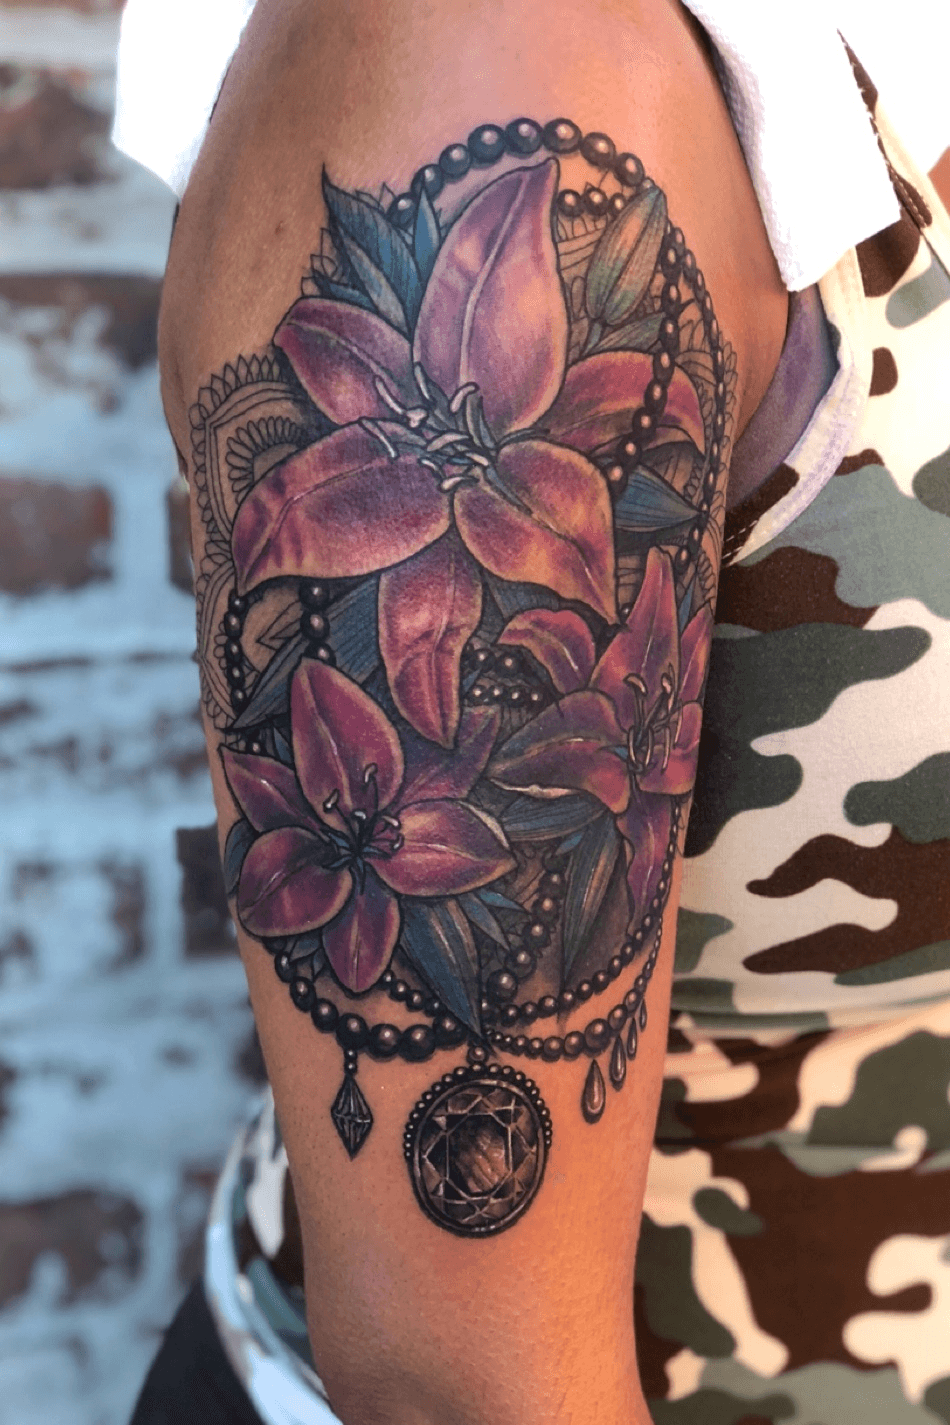 Stargazer Lily Cover Up by Stacey Blanchard TattooNOW